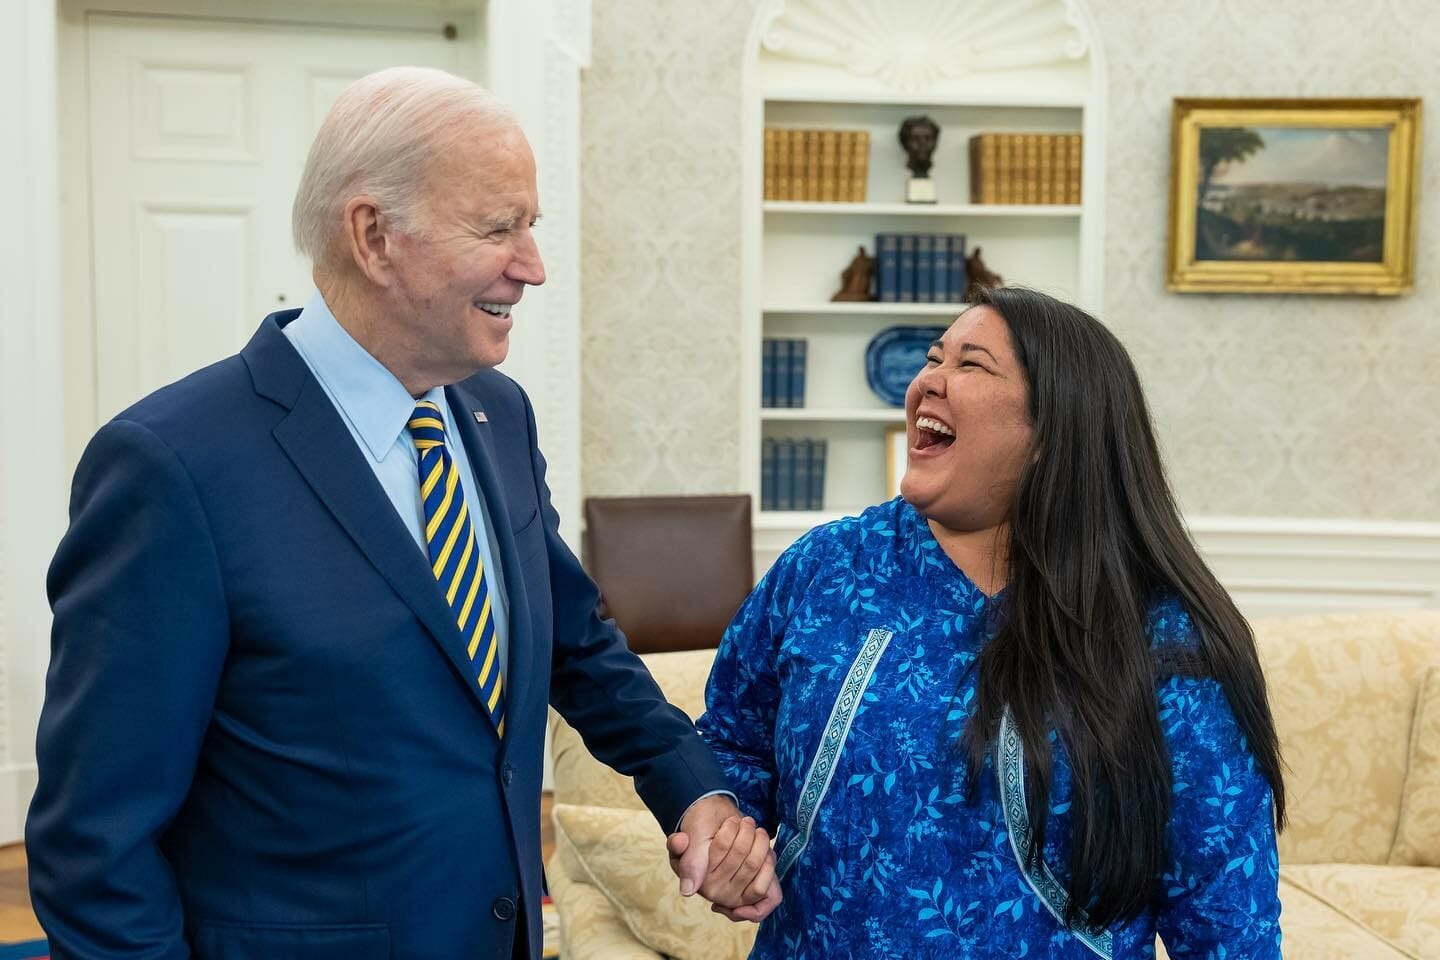 President Joe Biden and Alannah Hurley laugh together in the oval office